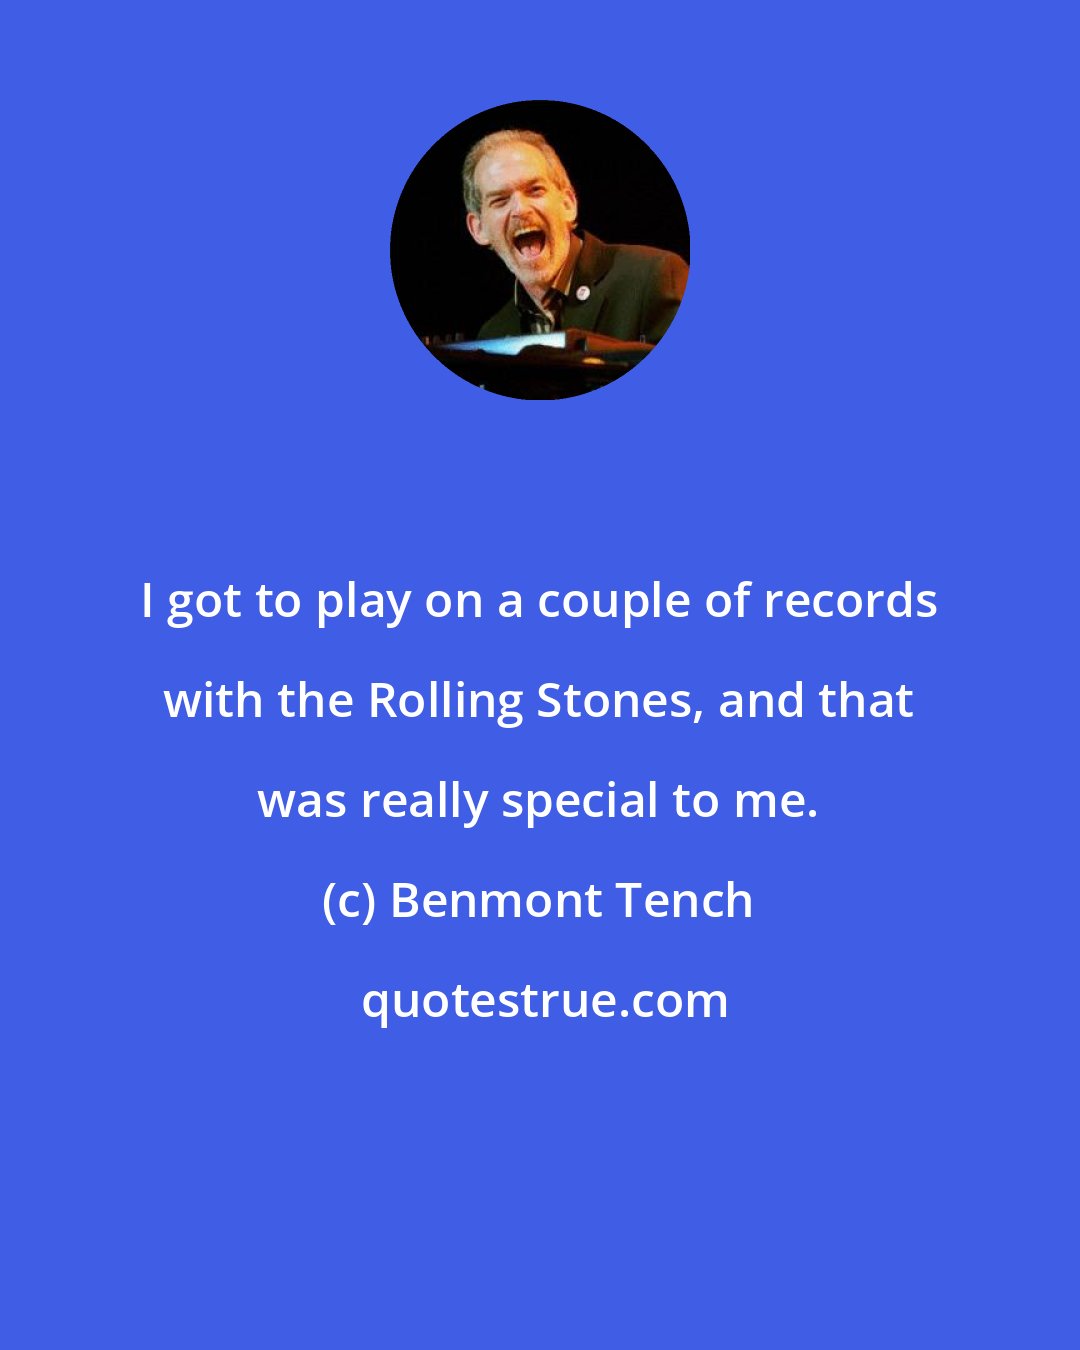 Benmont Tench: I got to play on a couple of records with the Rolling Stones, and that was really special to me.